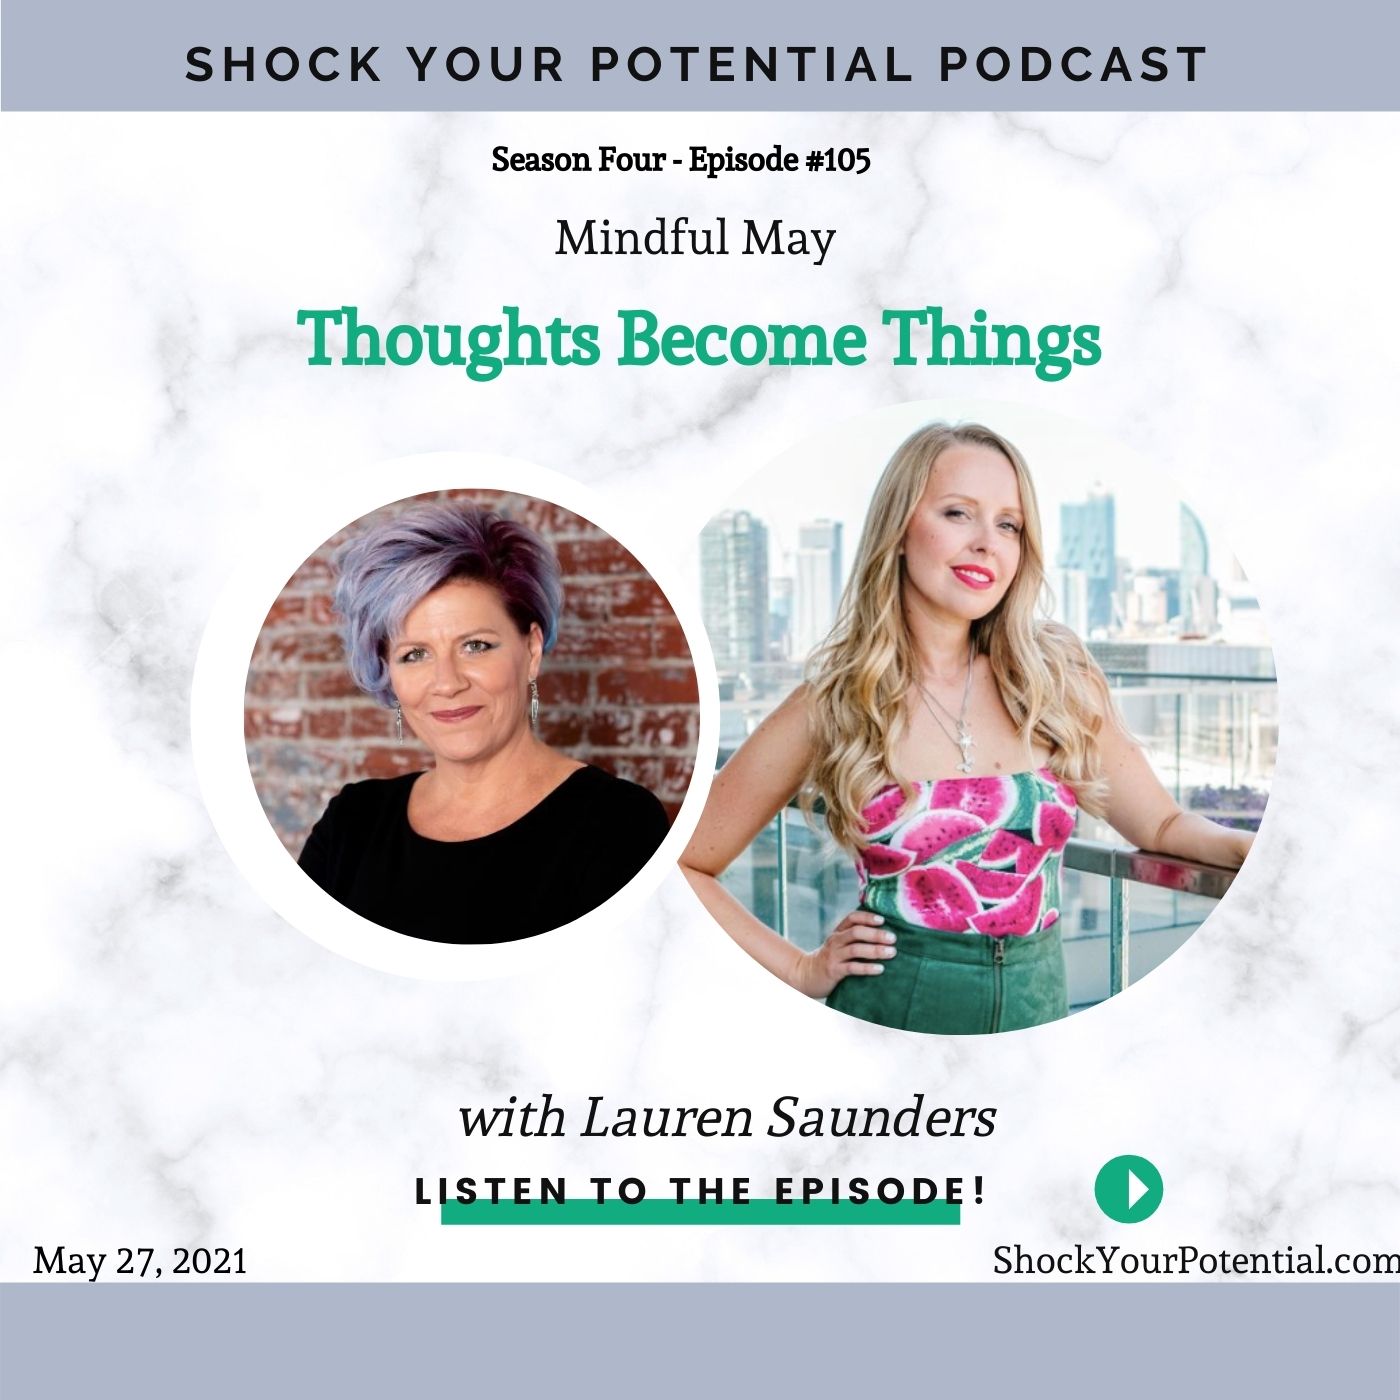 Thoughts Become Things – Lauren Saunders